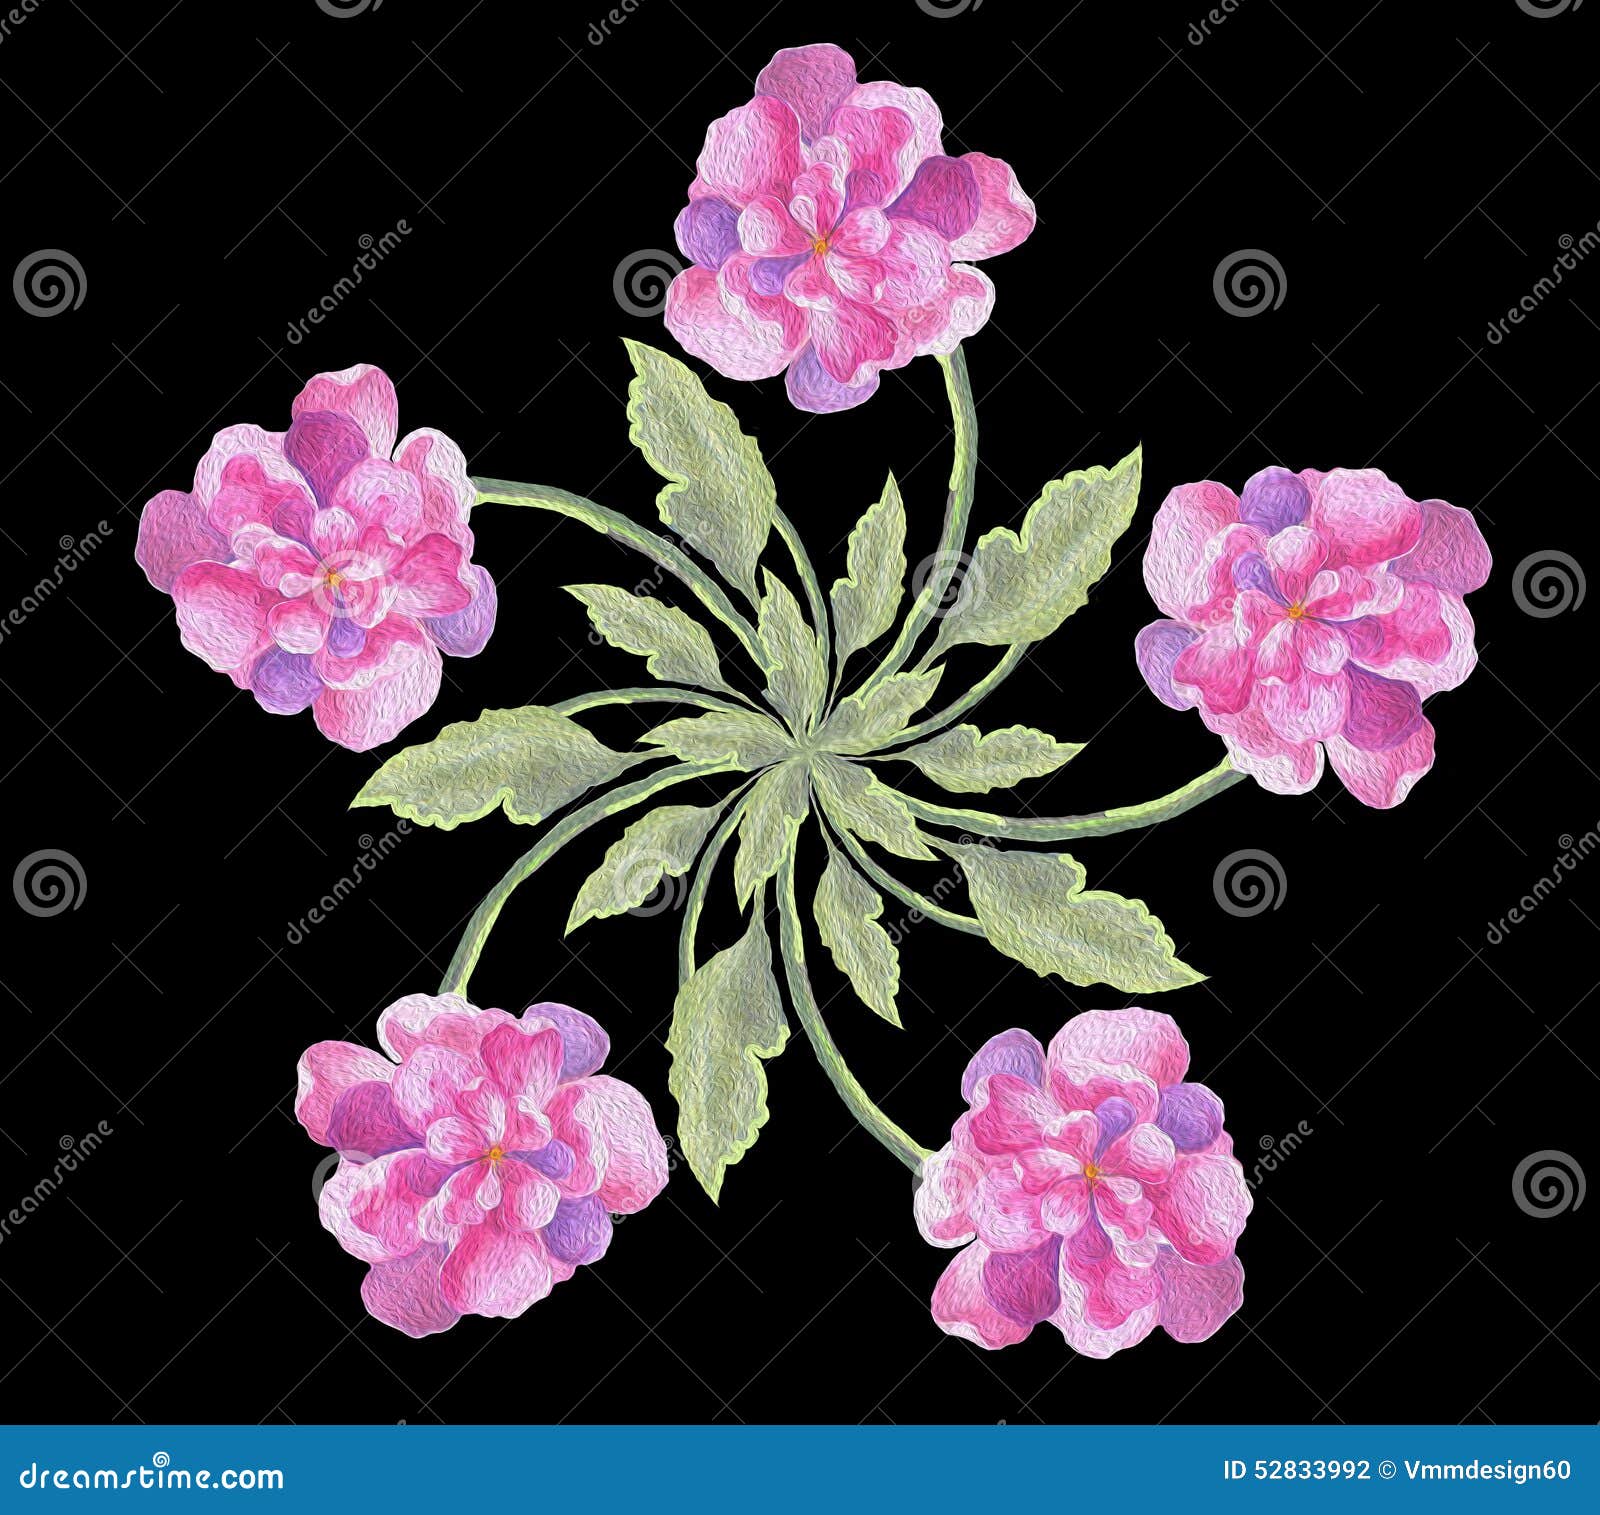 Flower Bouquet Peony Blossoms On A Black Background Colorful Watercolor Seamless Wallpaper Stock Illustration Illustration Of Primrose Background 52833992